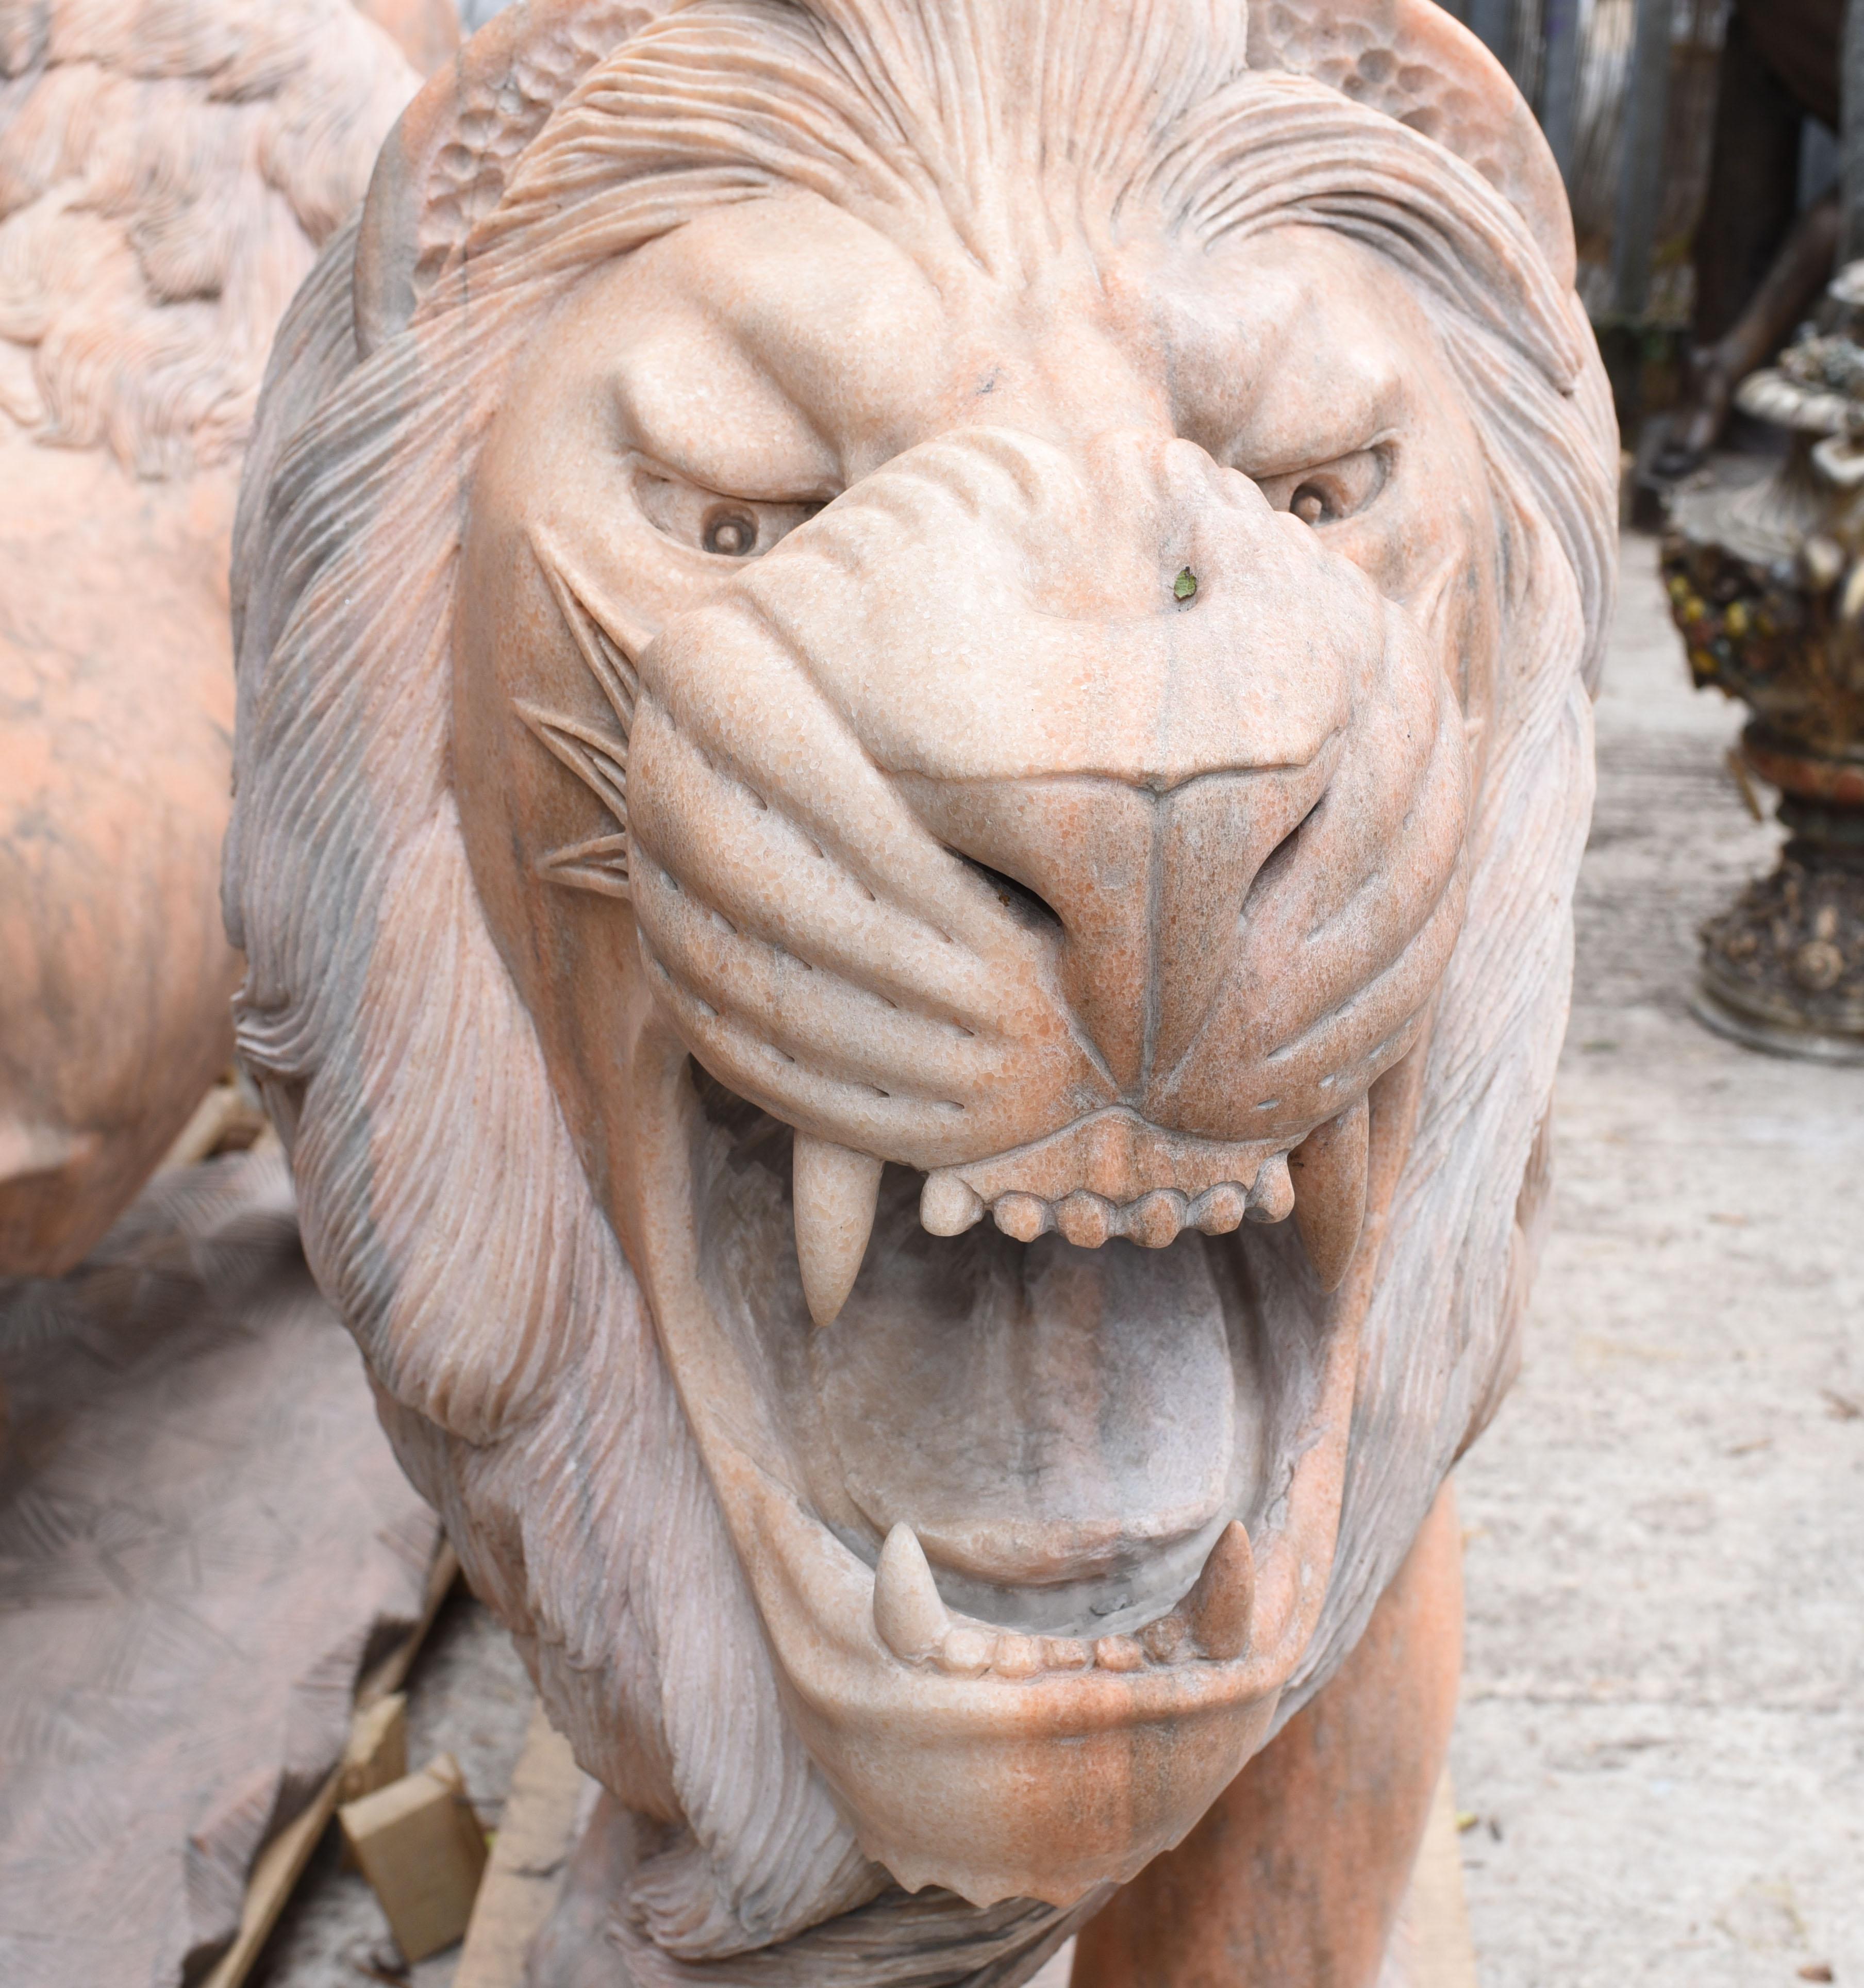 - Stunning pair of giant marble hand carved lions
- Almost six feet - 170 CM - head to tail - so good size to this pair
- Pink marble has a lovely colour, with gray flecks and veins - Smooth and chip free
- Great pair of gatekeepers in the